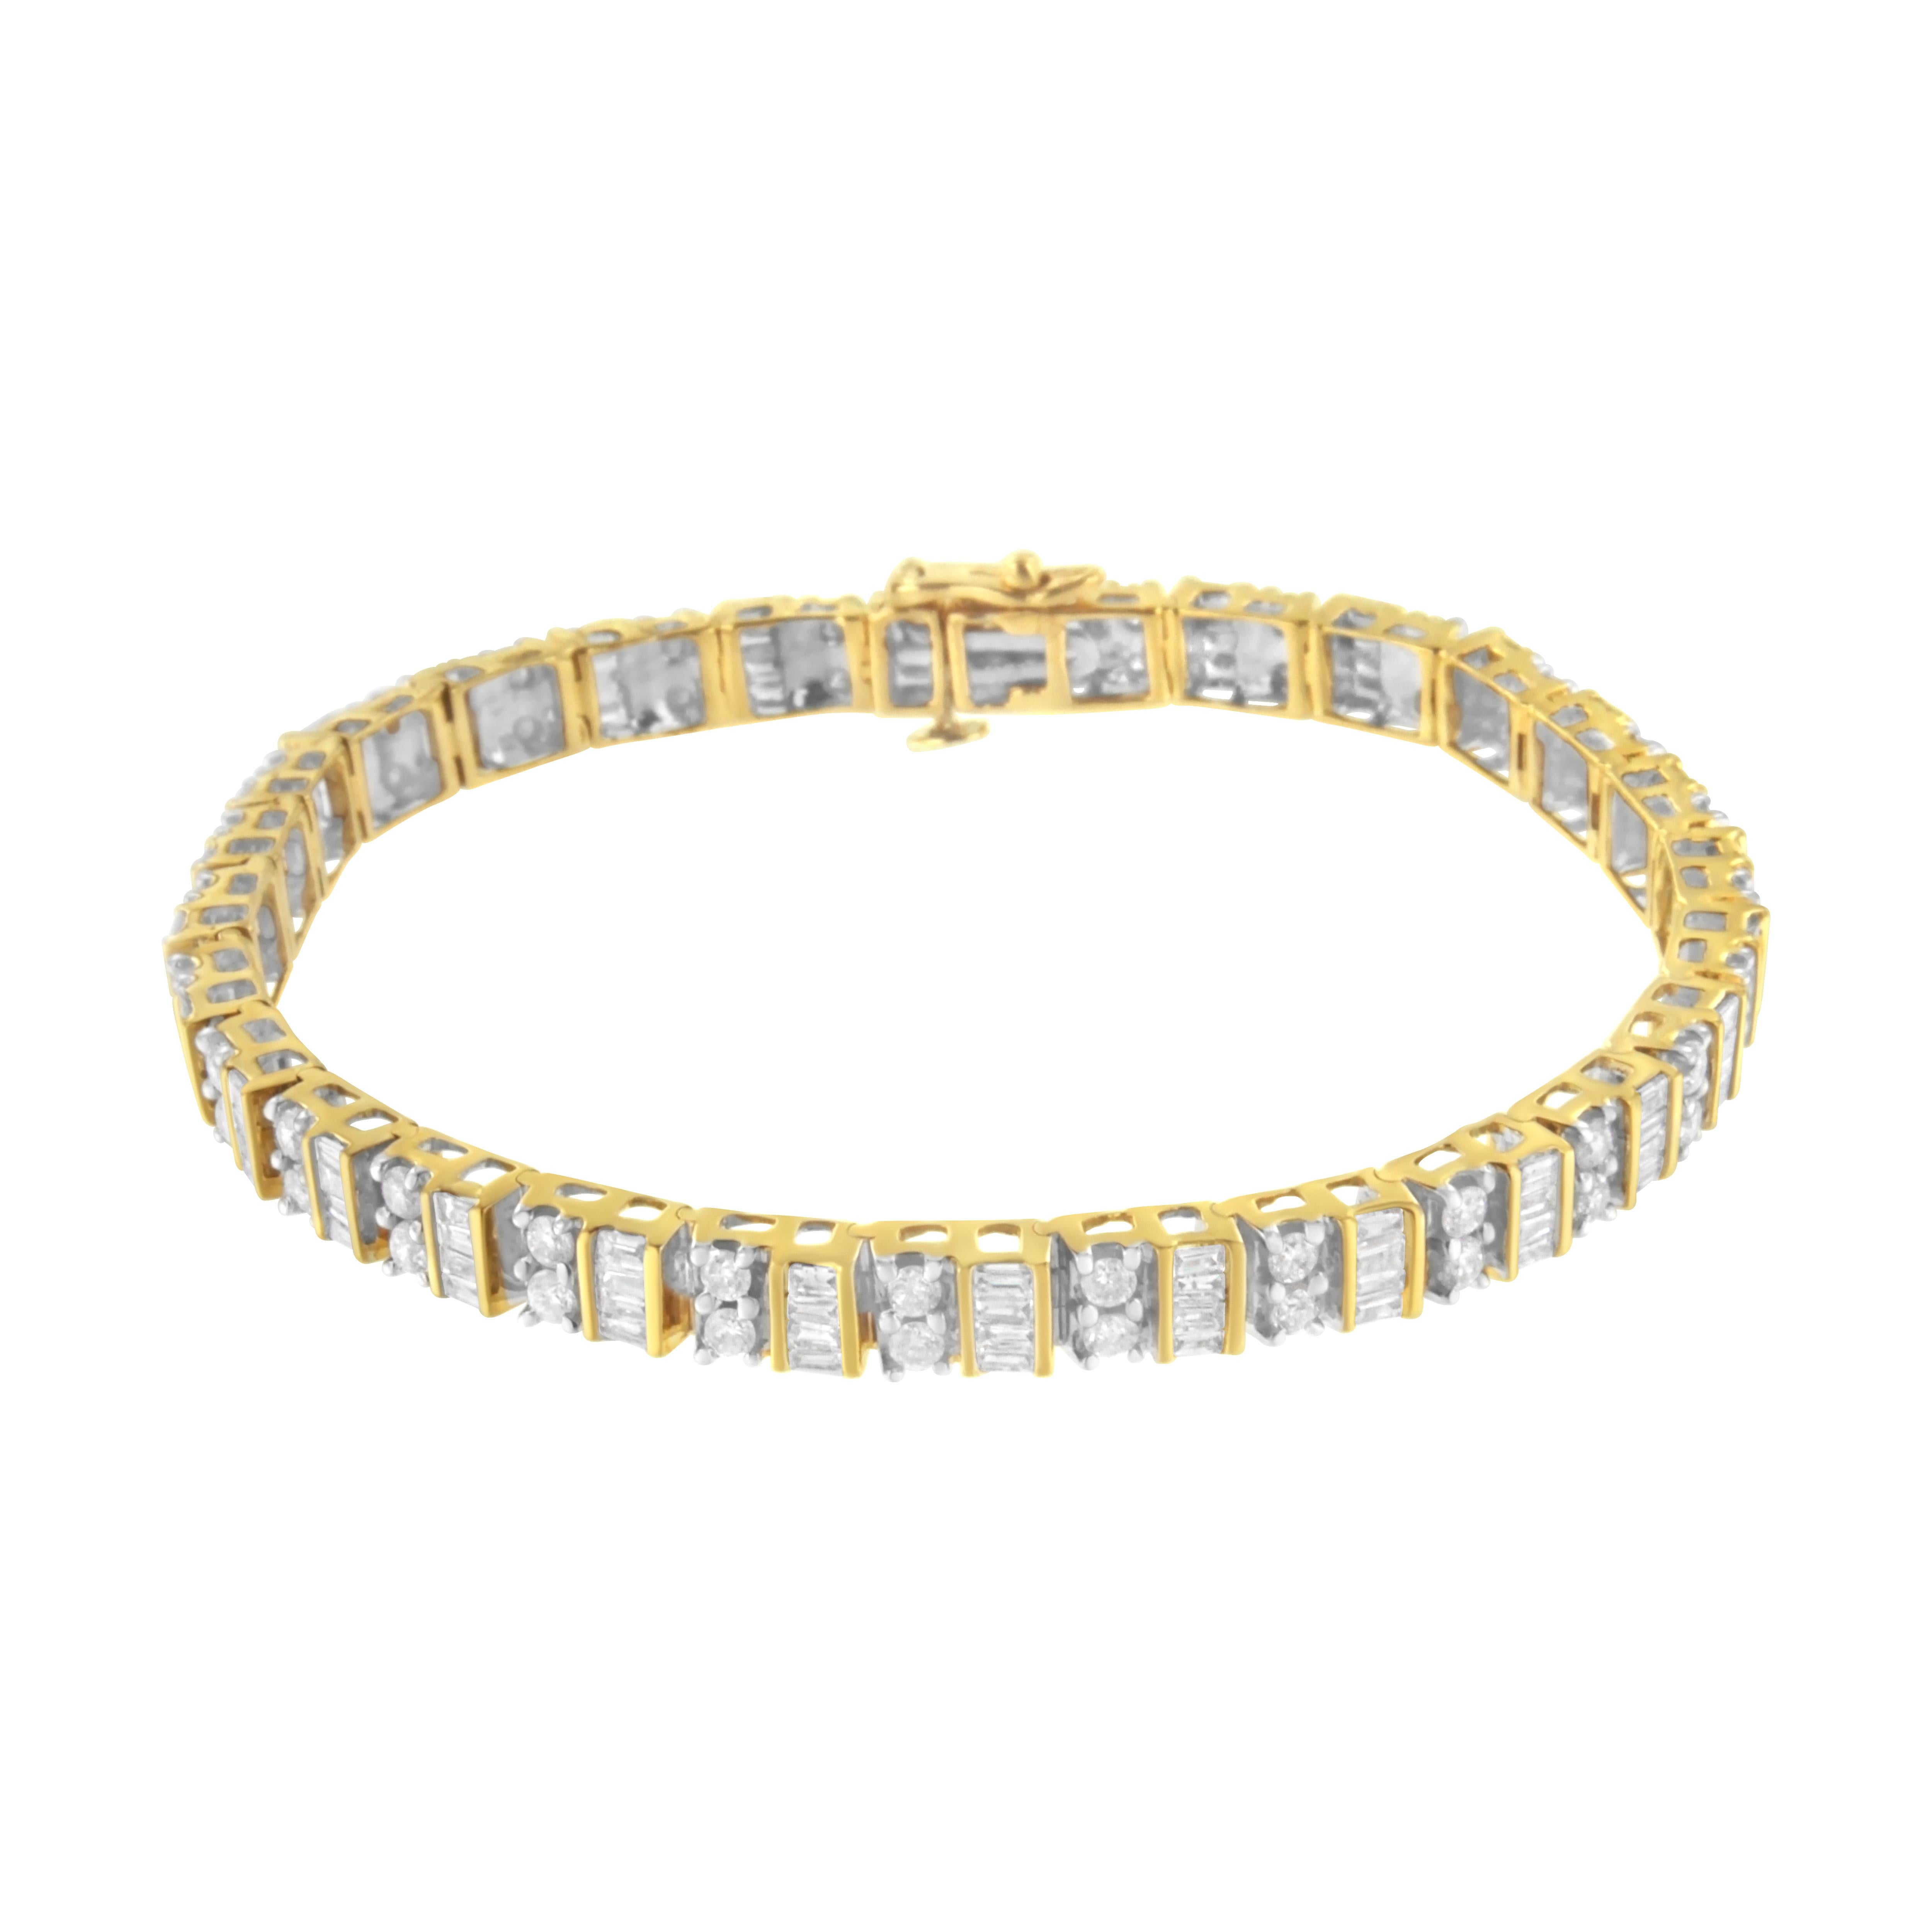 Superlative elegance meets breathtaking diamond sparkle. We are proud to present this stunning 4.00 ct. t.w. diamond tennis bracelet set in polished 14kt Yellow gold. Round and baguette diamonds, set in gold links, run all the way around the wrist